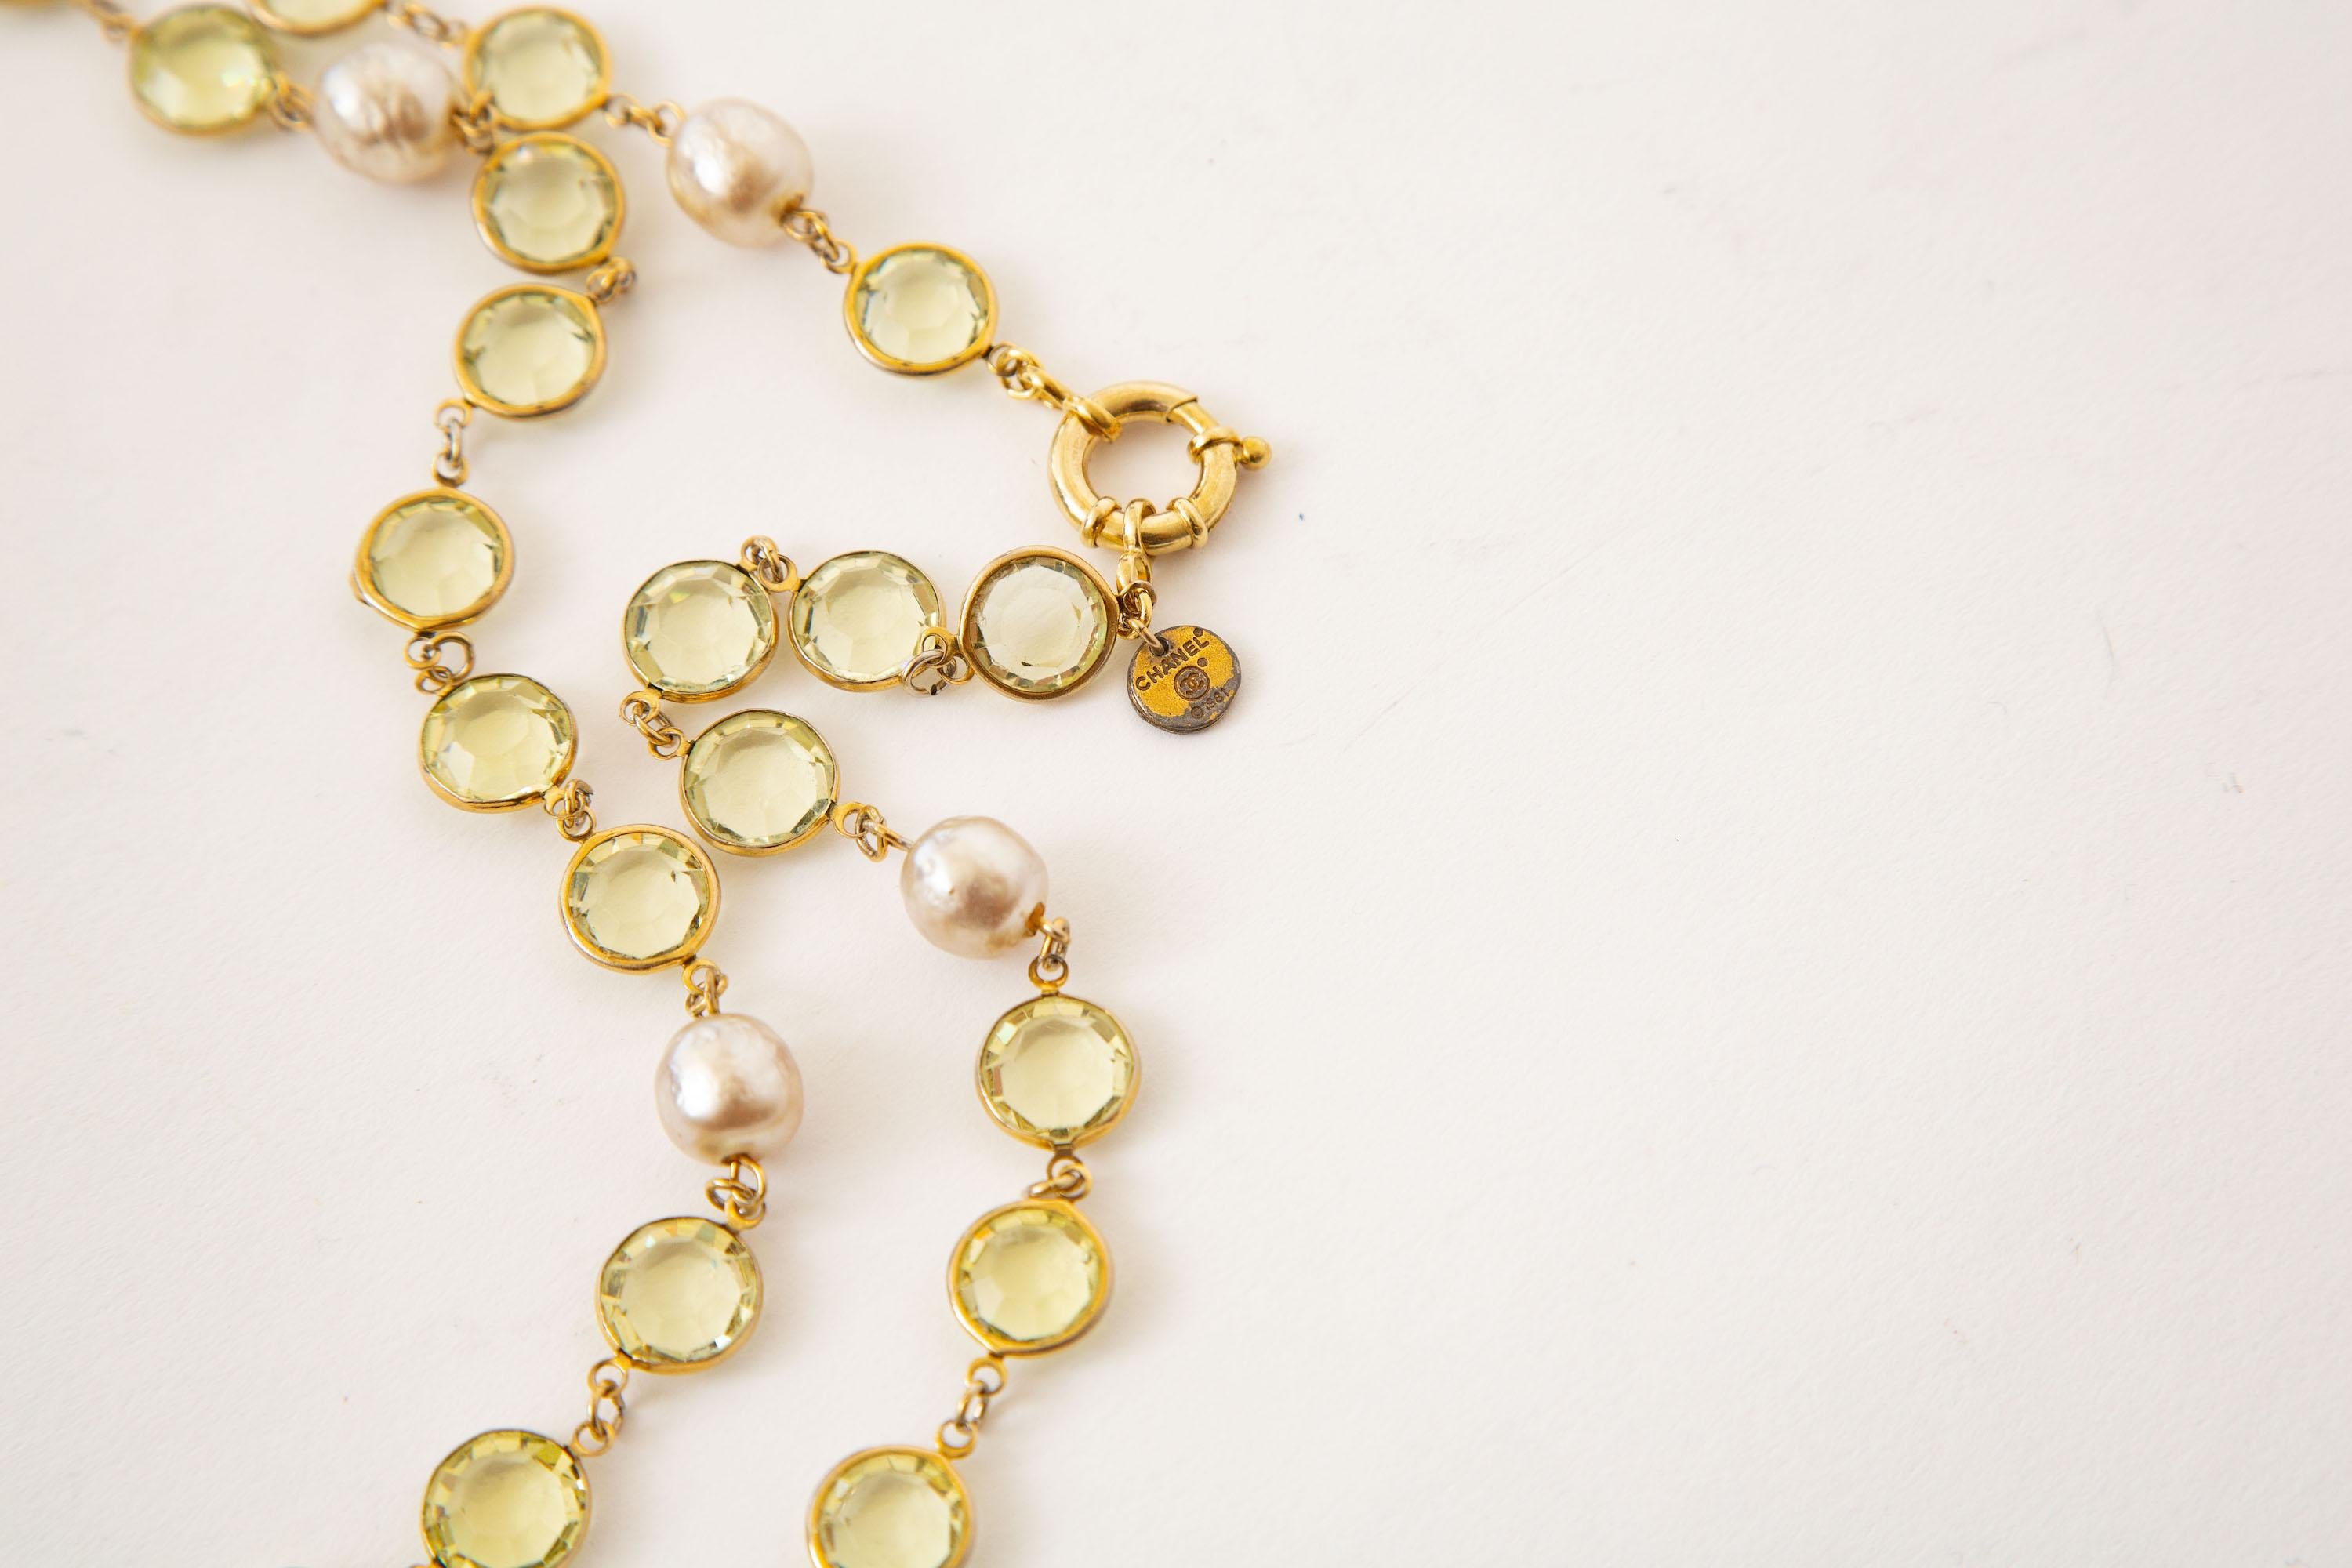 Vintage Chanel Chartreuse Beveled Crystals And Faux Pearl Sautoir Wrap Necklace 5